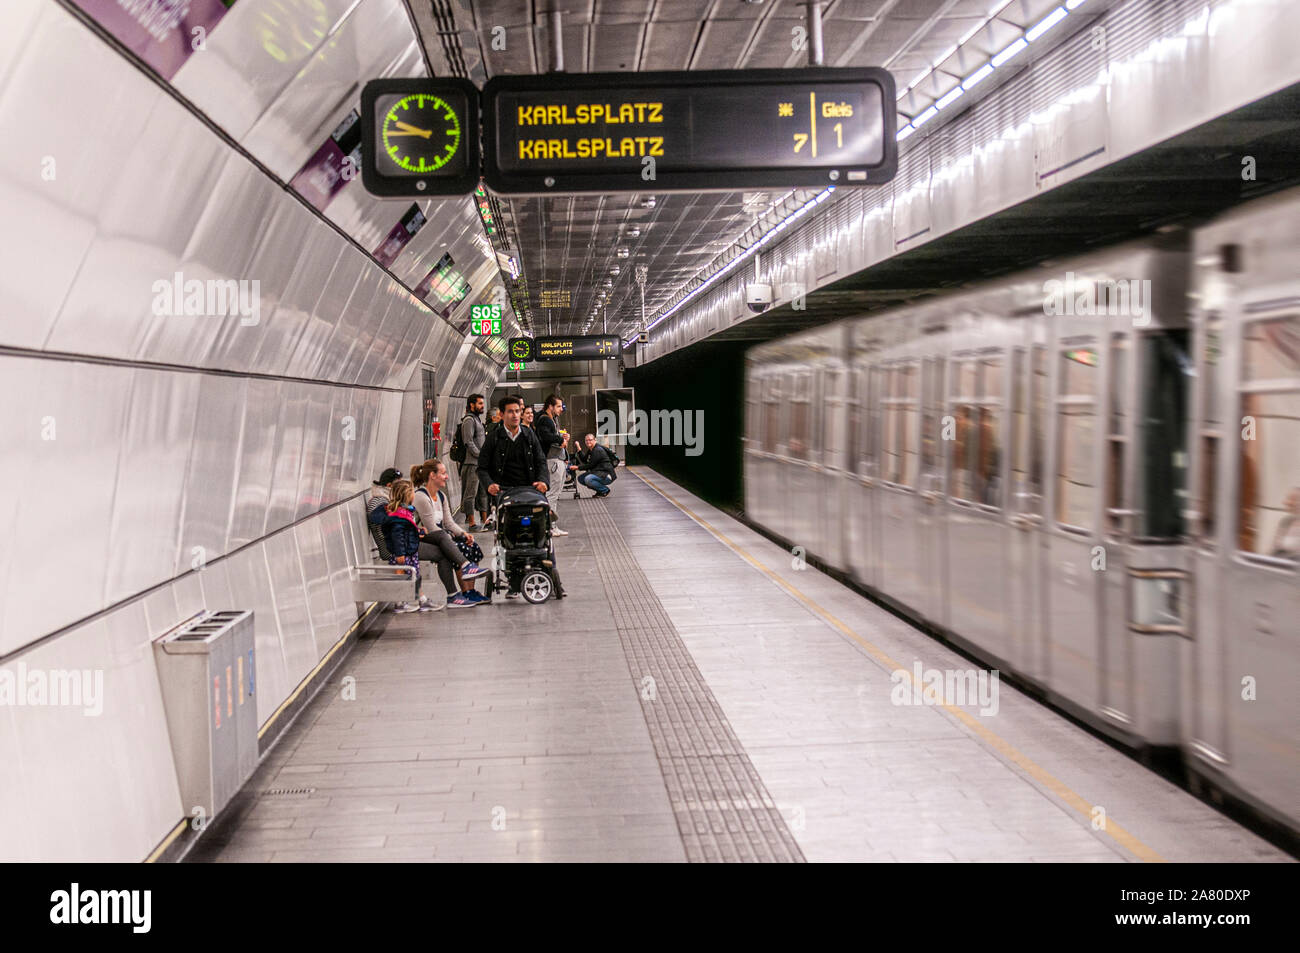 Train enters a metro station in Vienna, Austria Passengers are waiting on the platform Stock Photo